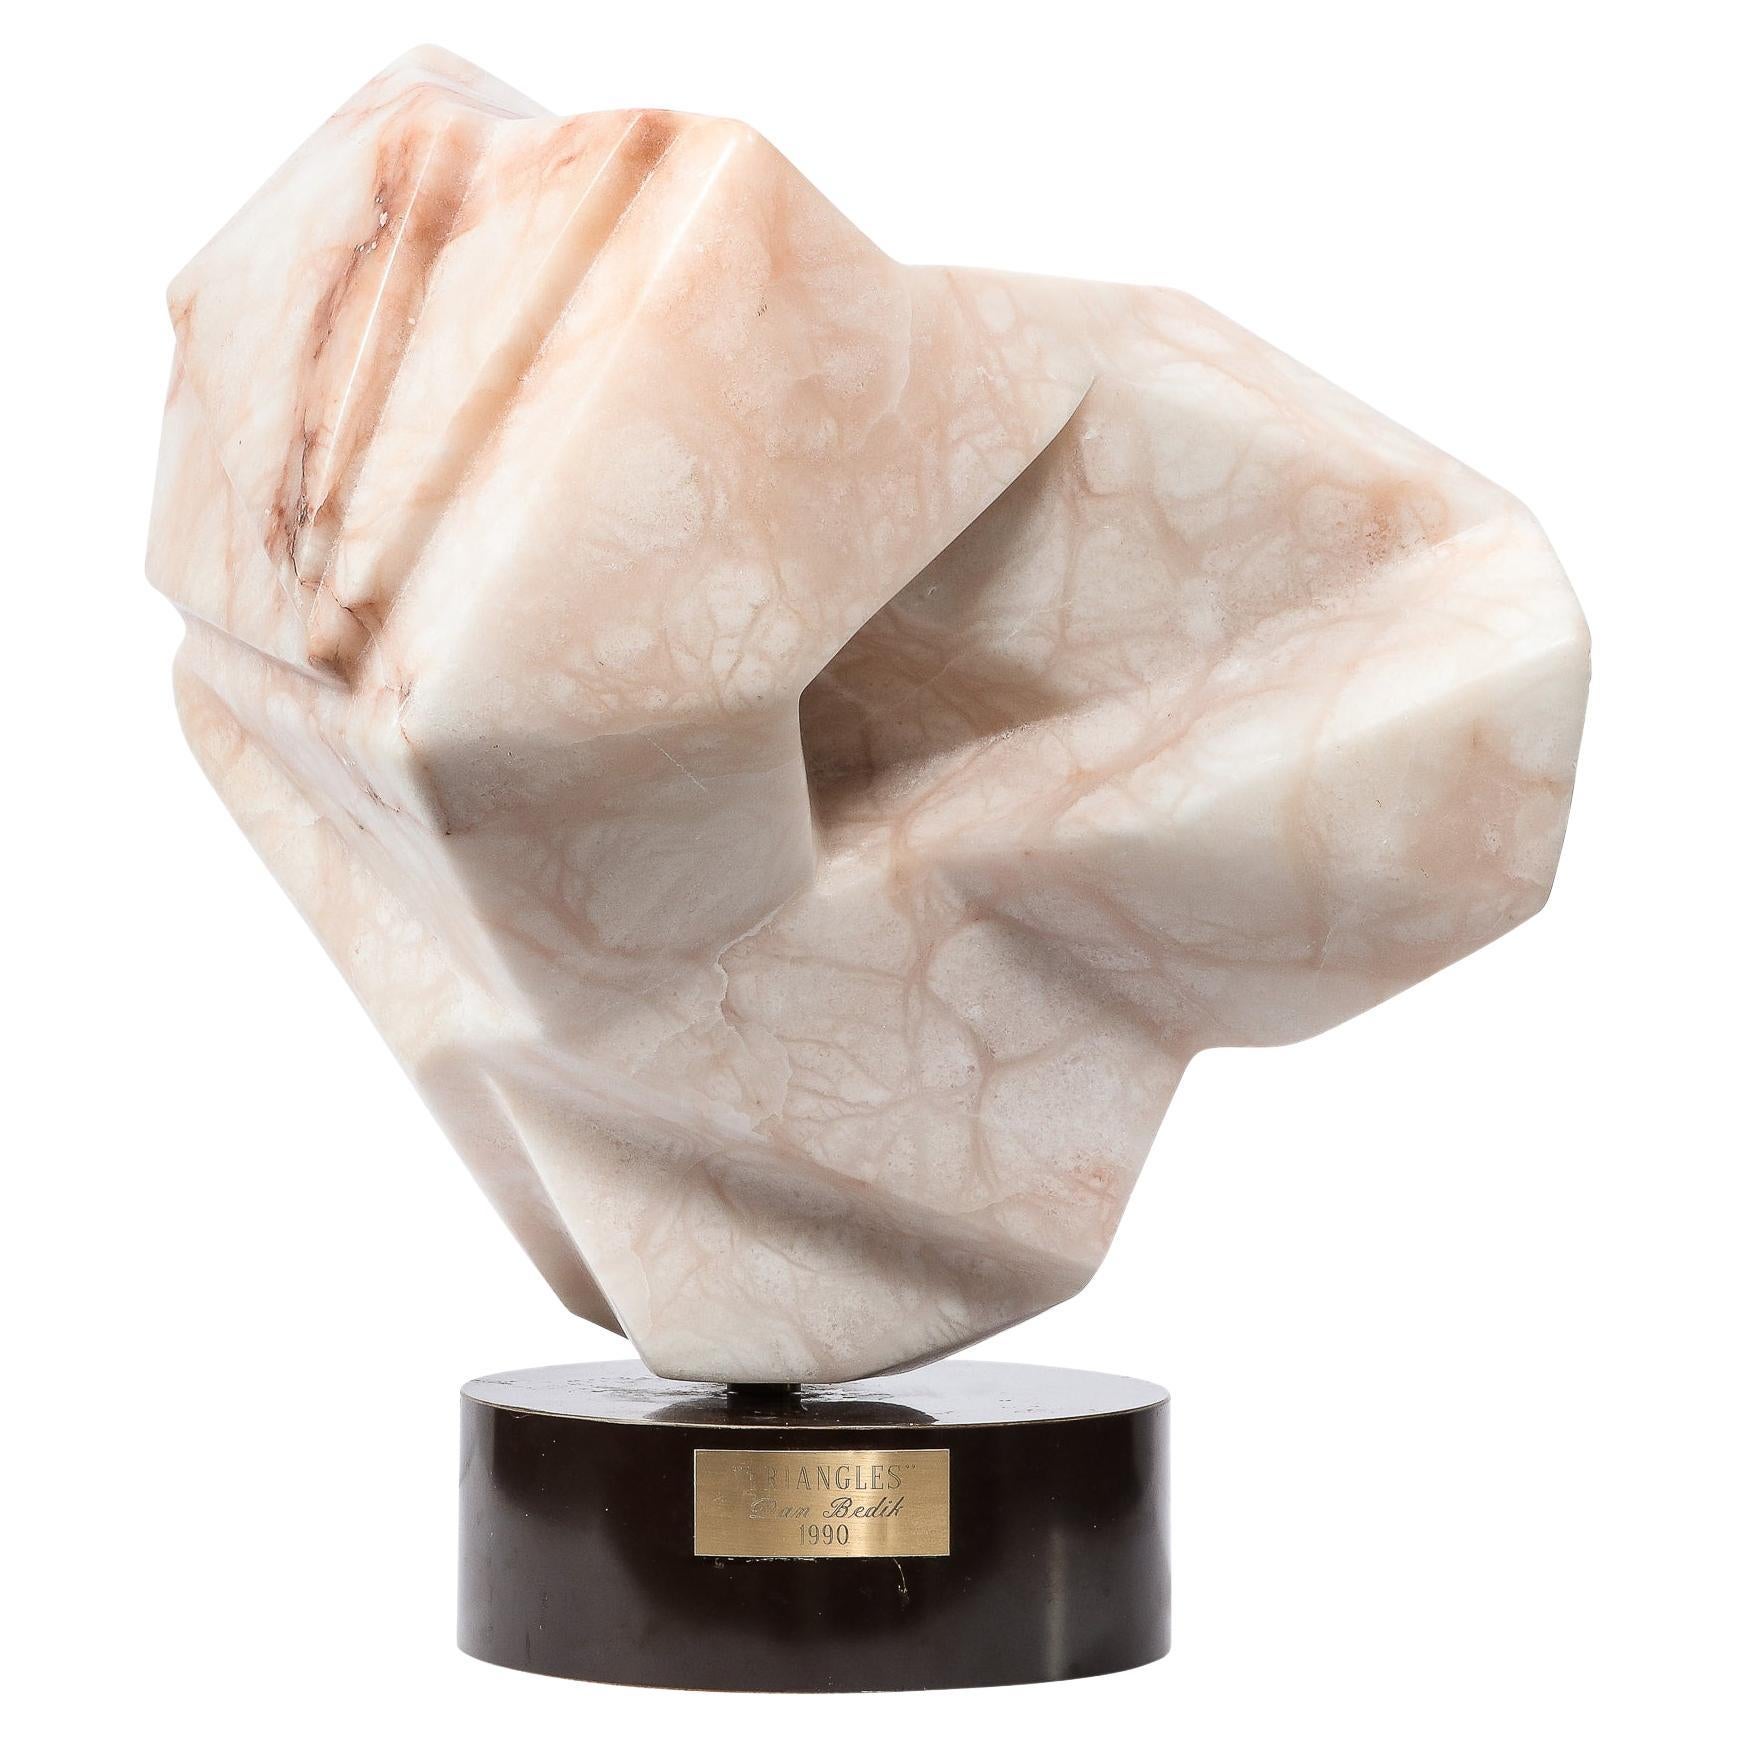 Modernist Abstract Geometric Exotic Marble Sculpture, "Triangles", by Dan Bedik  For Sale